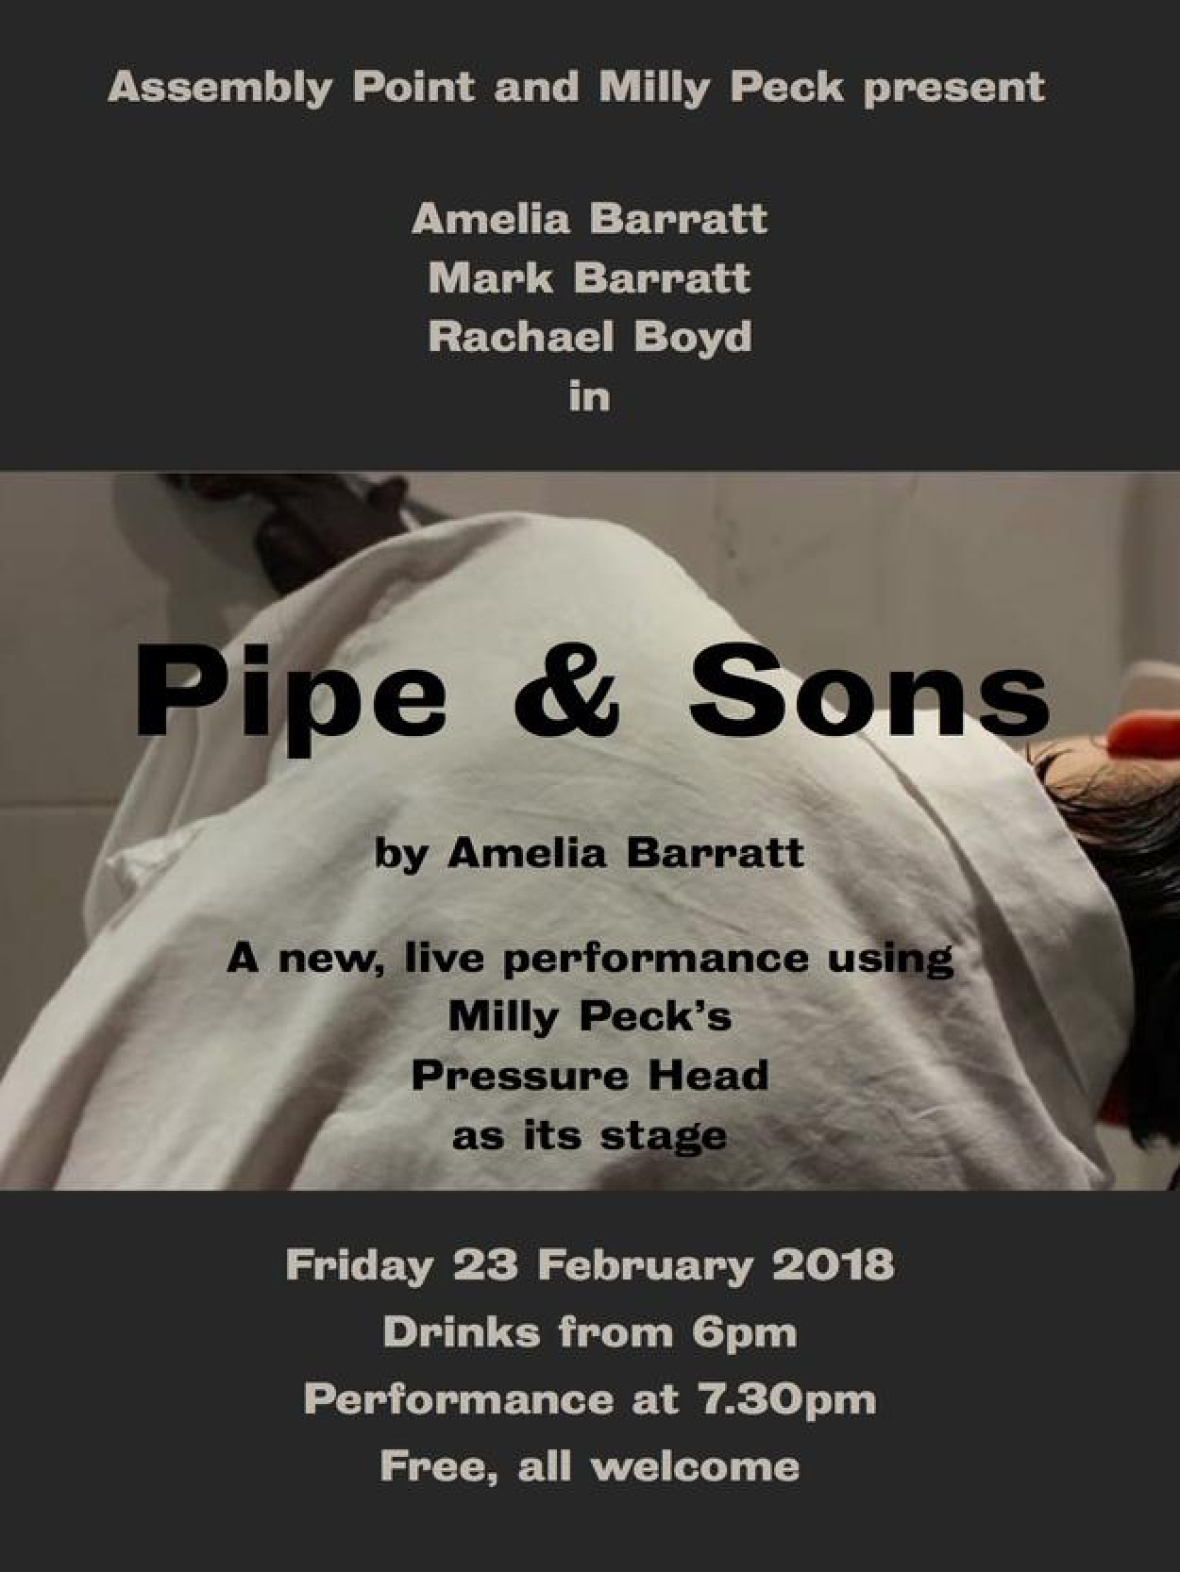 Pipe & Sons – Amelia Barratt - Assembly Point